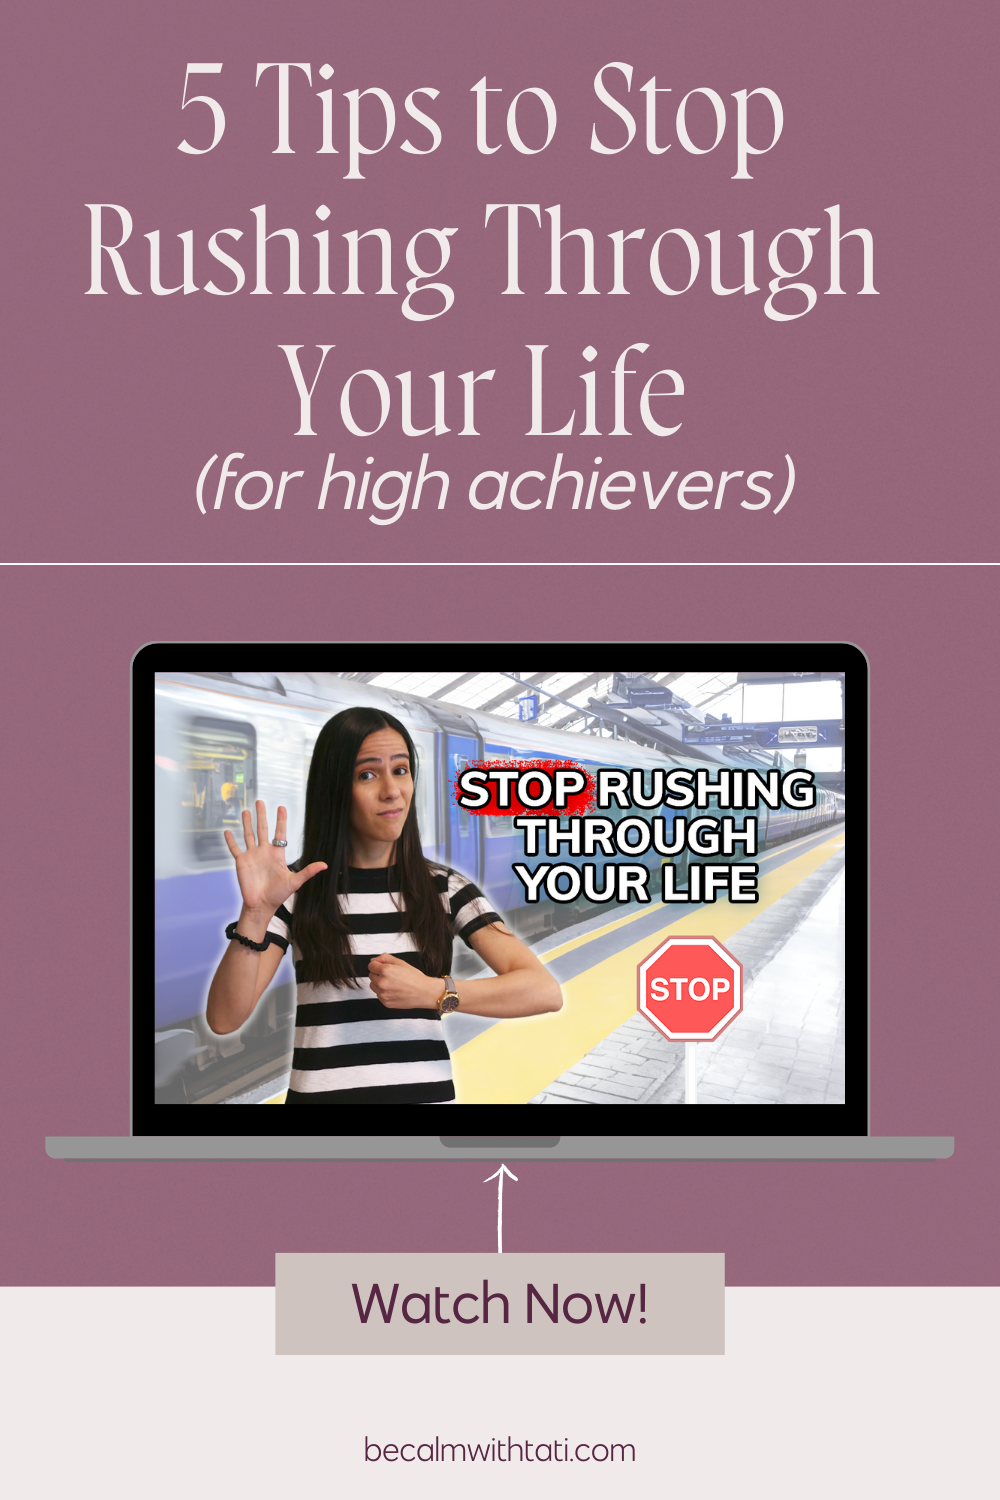 5 Tips to Stop Rushing Through Your Life (for high achievers)